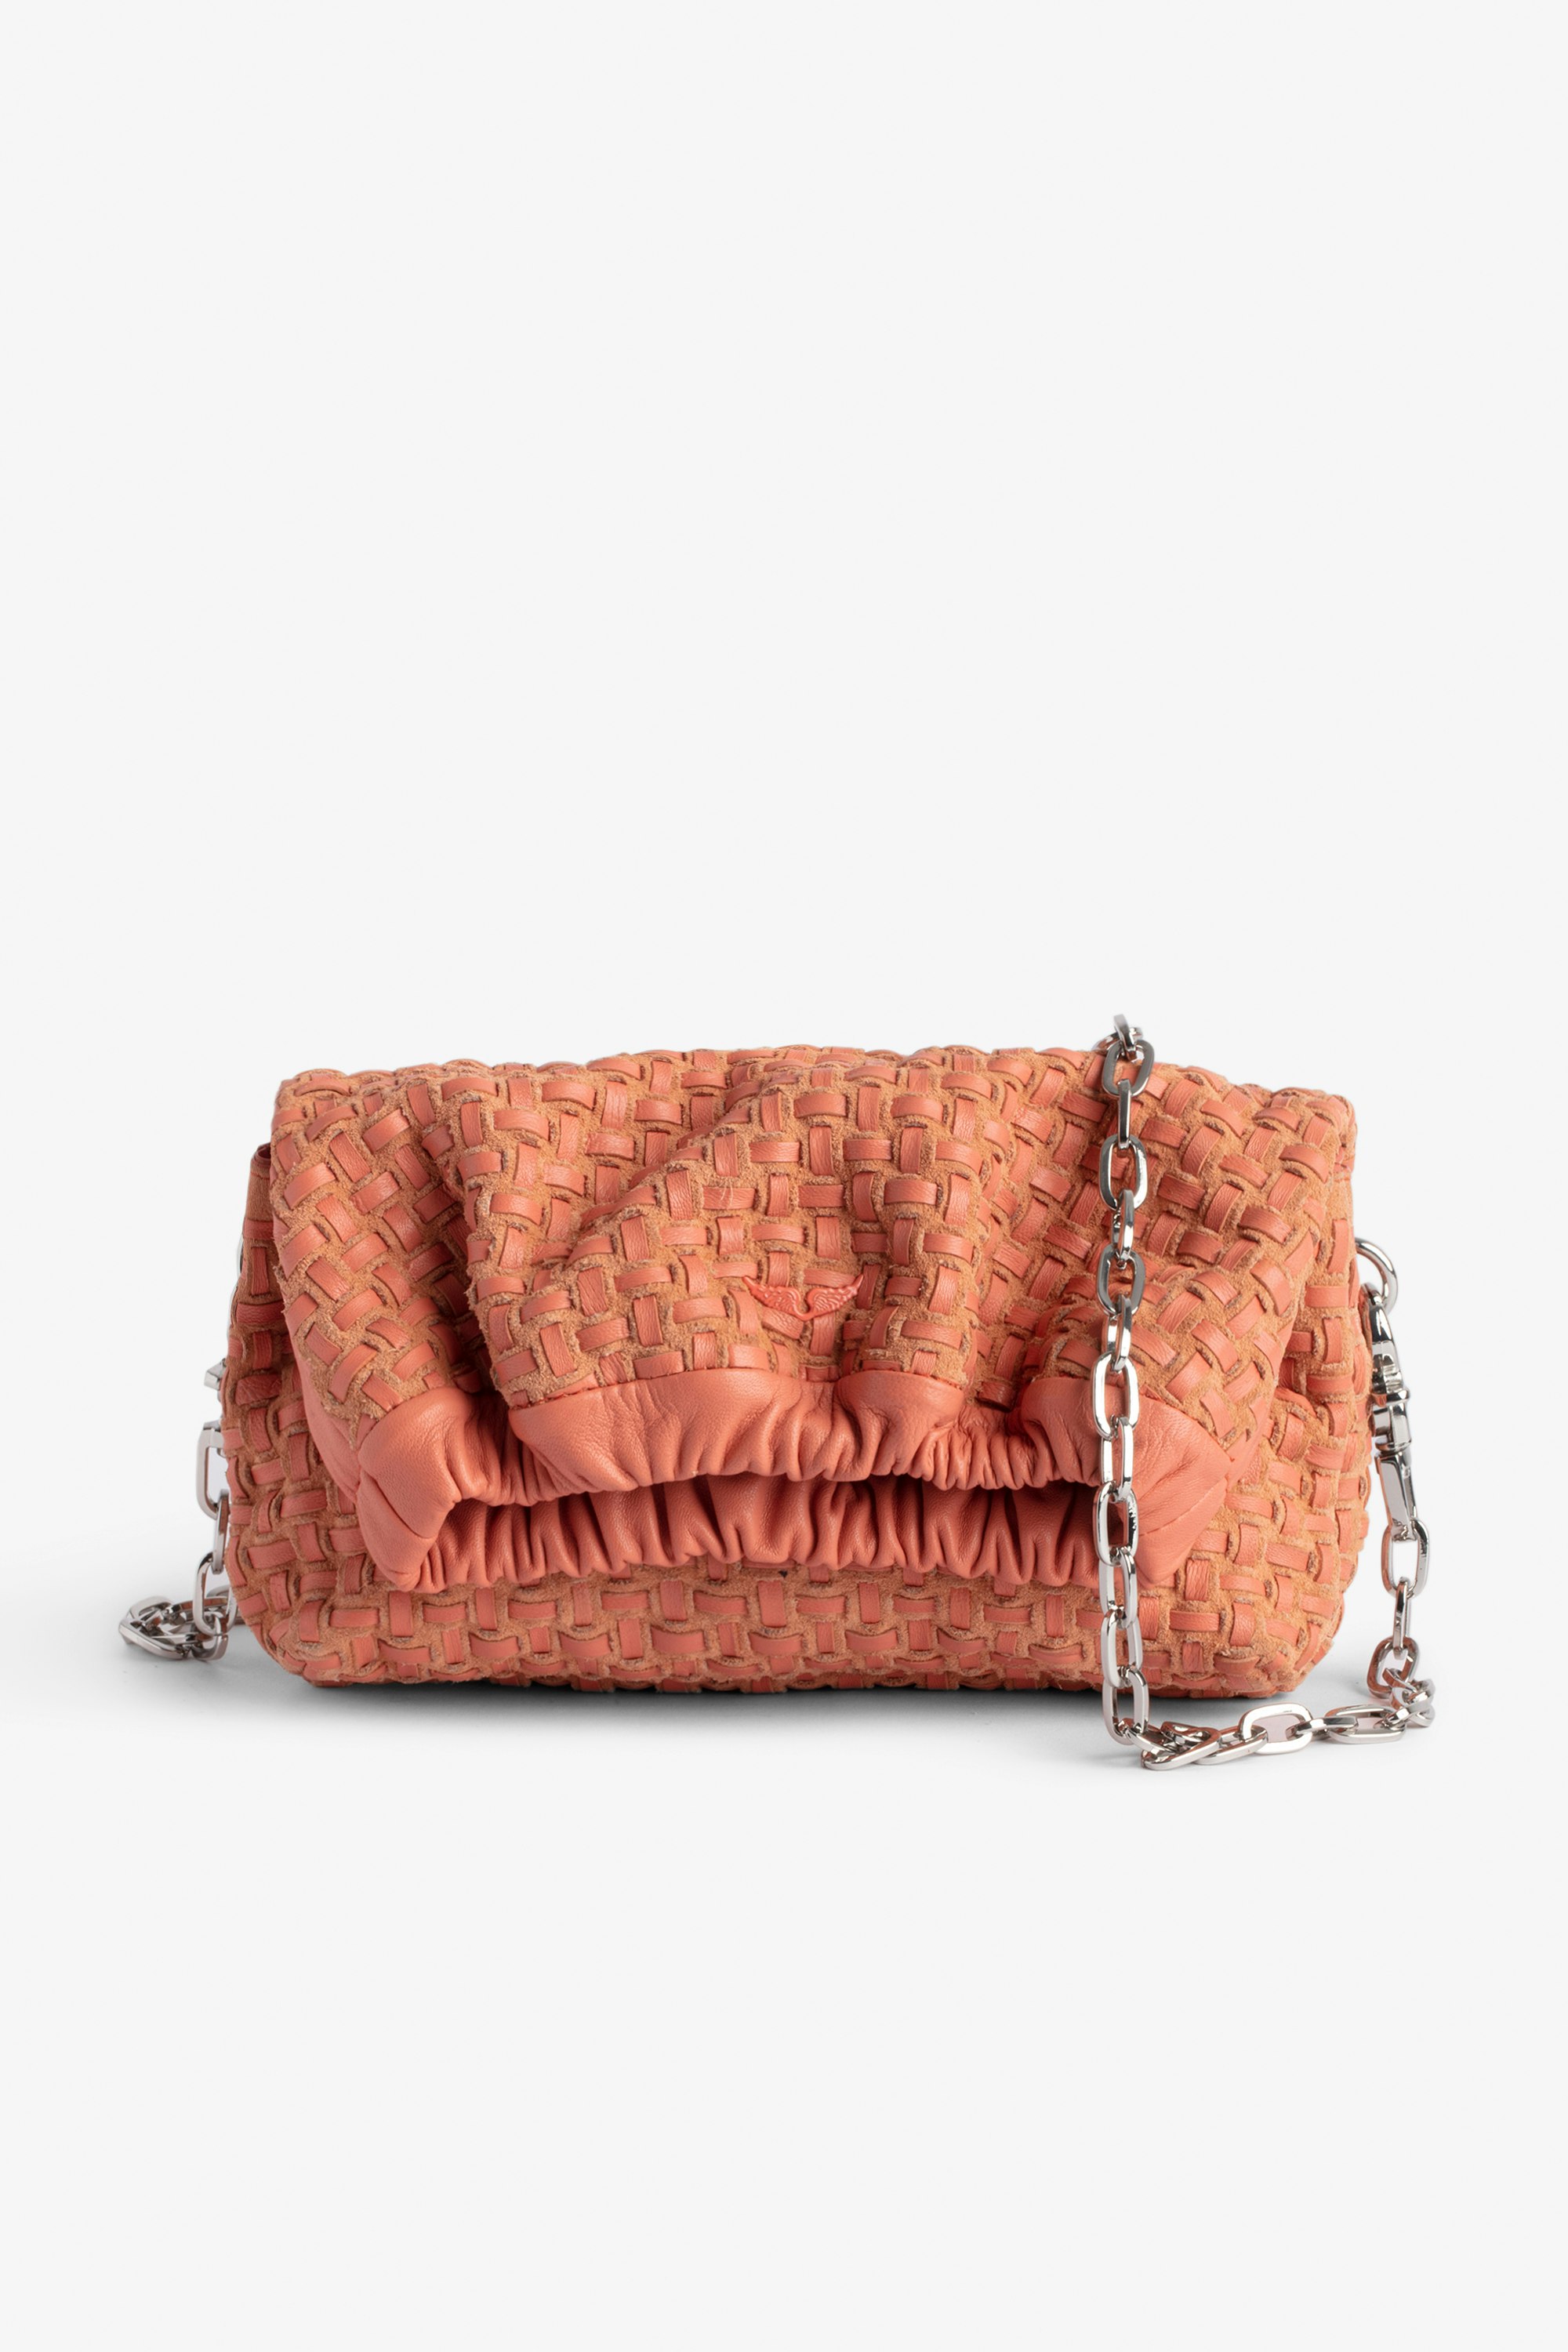 Rockyssime XS Bag Women’s small bag in orange latticework leather with gathered closure and metal chain